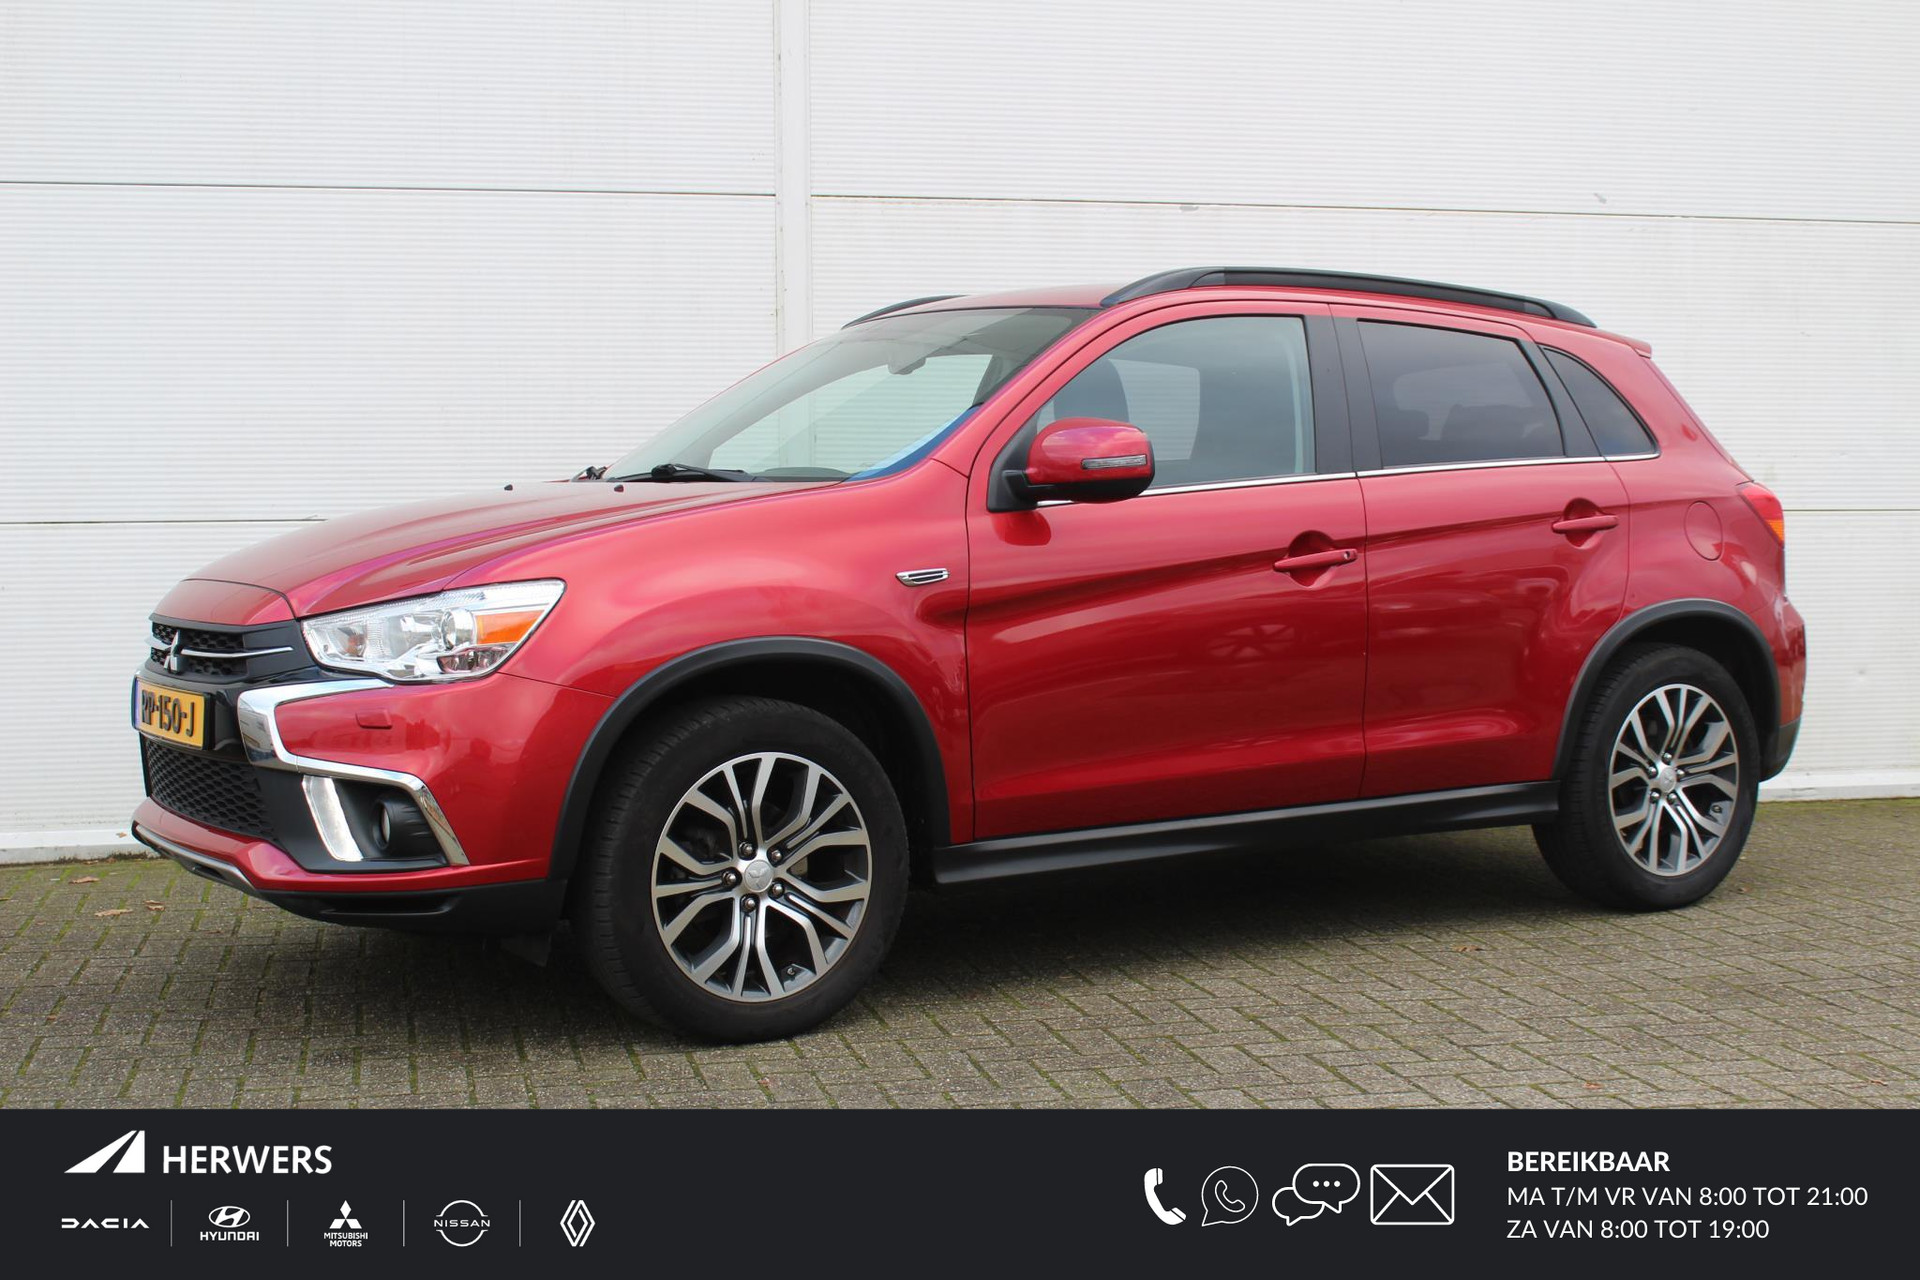 Mitsubishi ASX 1.6 Cleartec Connect Pro / Achteruitrijcamera / Keyless Entry & Start / Cruise Control / Climate Control / Apple Carplay/Android Auto / bij viaBOVAG.nl